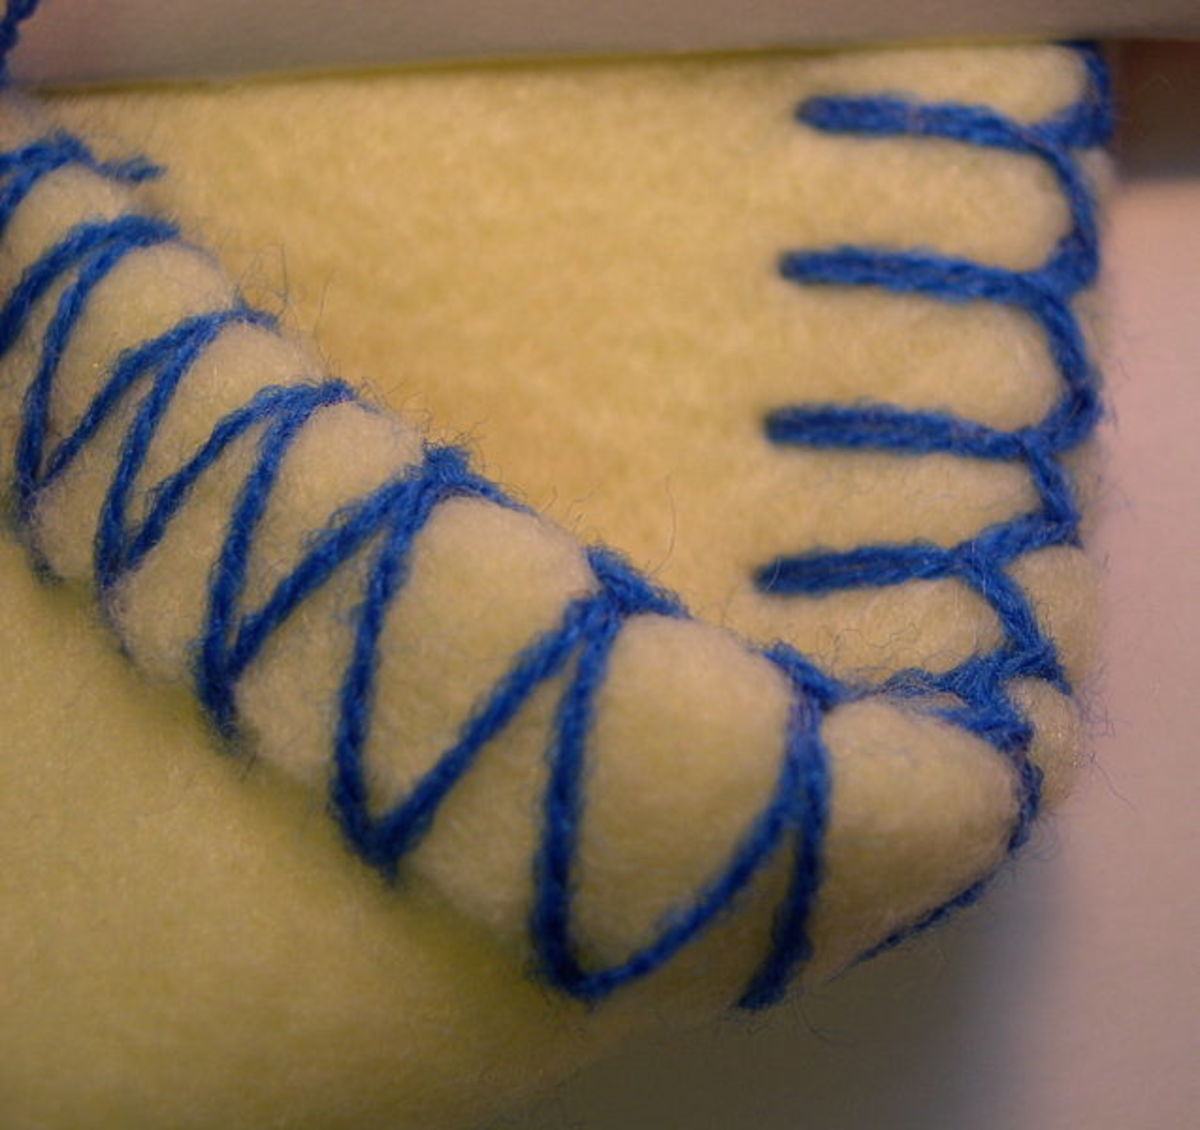 What does "a stitch in time saves nine" mean? Source: http://commons.wikimedia.org/wiki/File:Merrow_rolled_blanket_stitch.jpeg